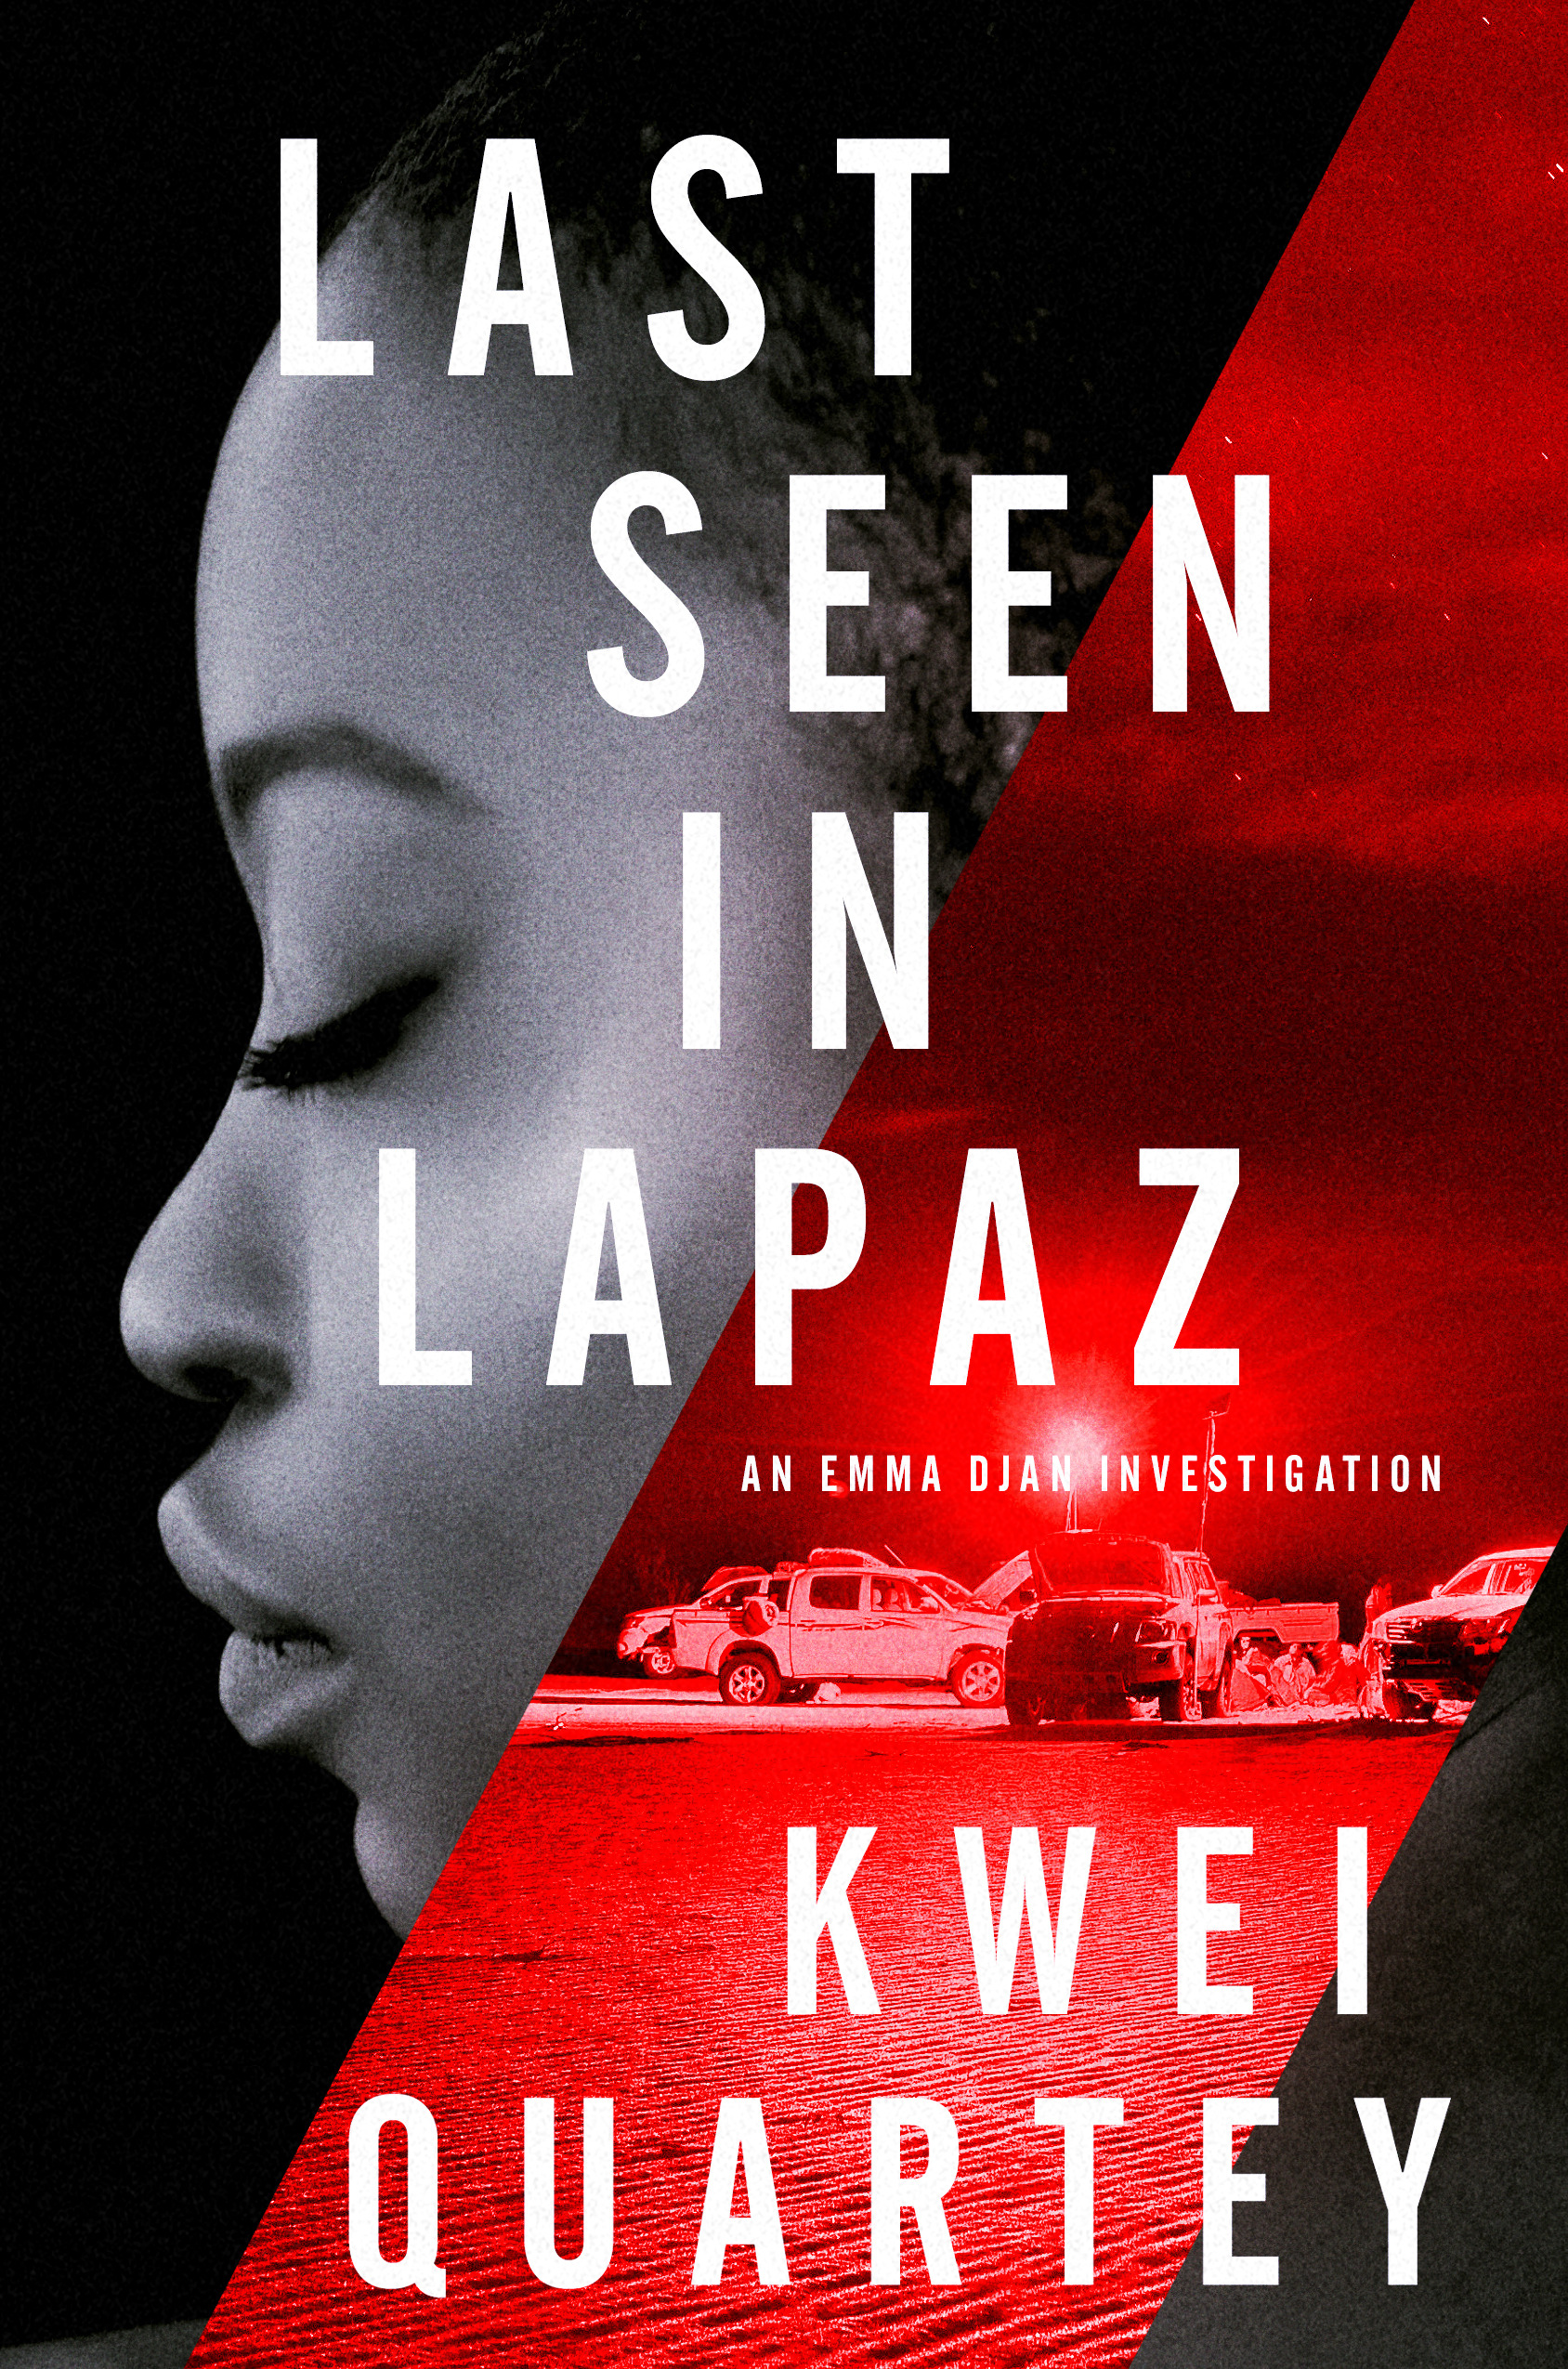 The book cover of Kwei Quartey's Last Seen in Lapaz